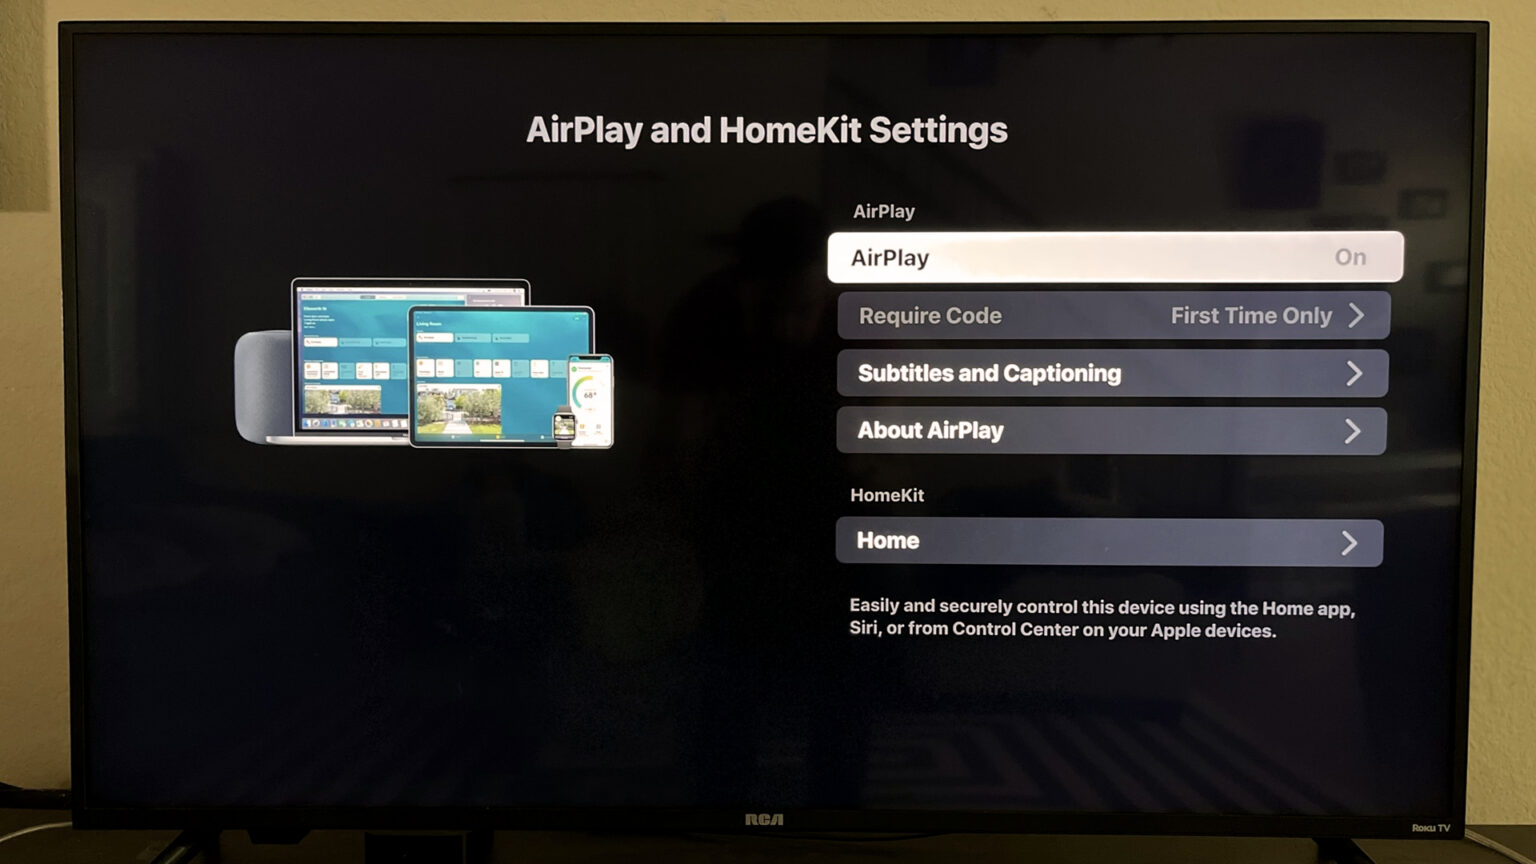 how to airplay from mac to roku tv